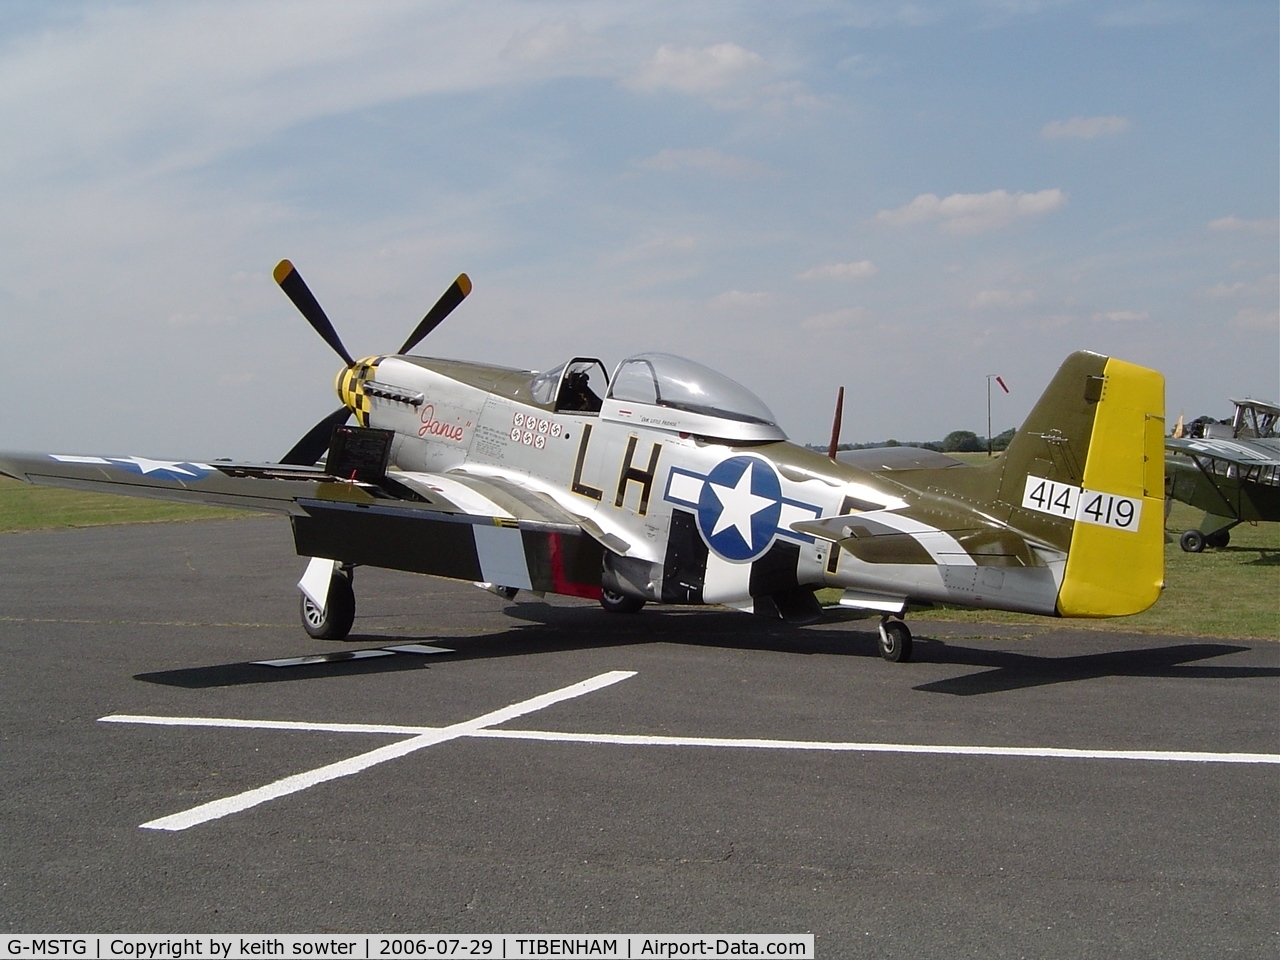 G-MSTG, 1945 North American P-51D Mustang C/N 124-48271, Parked up after its fantastic display